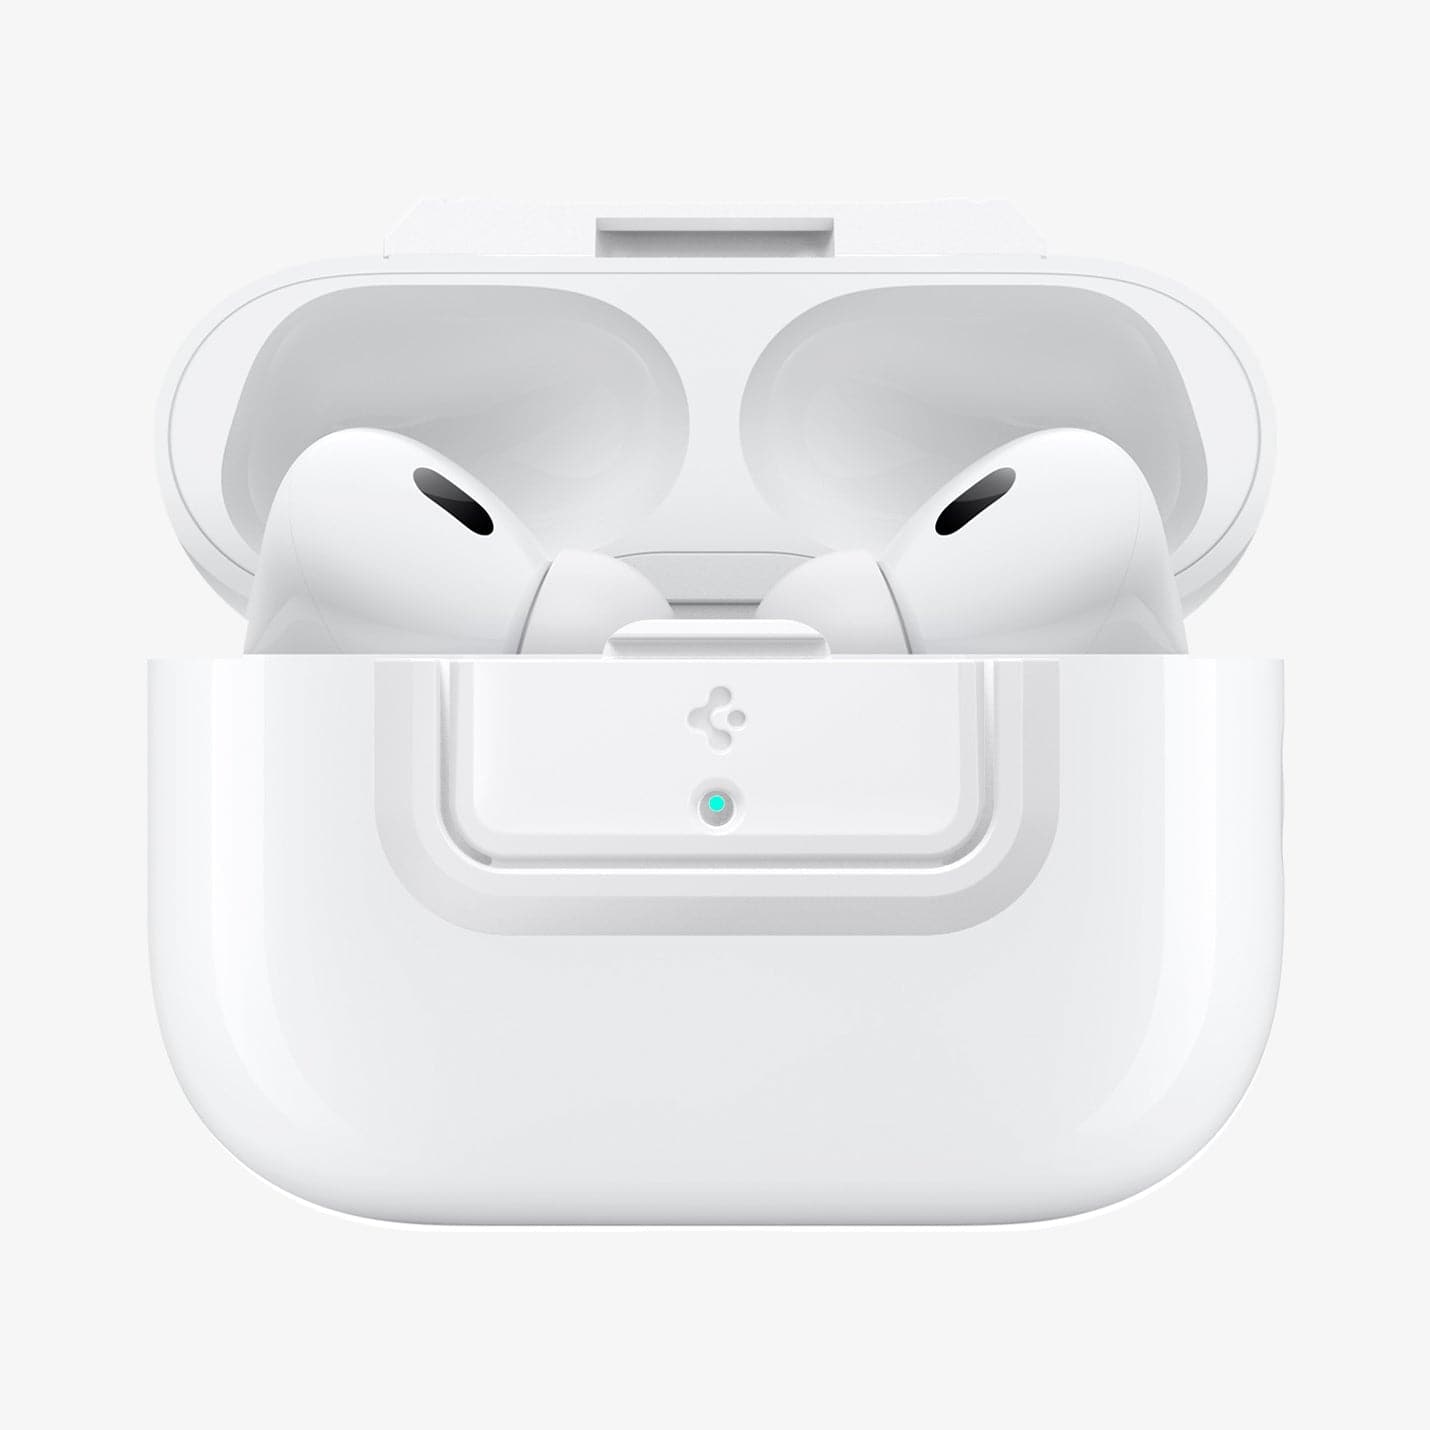 ASD06090 - Apple AirPods Pro / AirPods Pro 2 Case Lock Fit in white showing the front with top open and AirPods inside